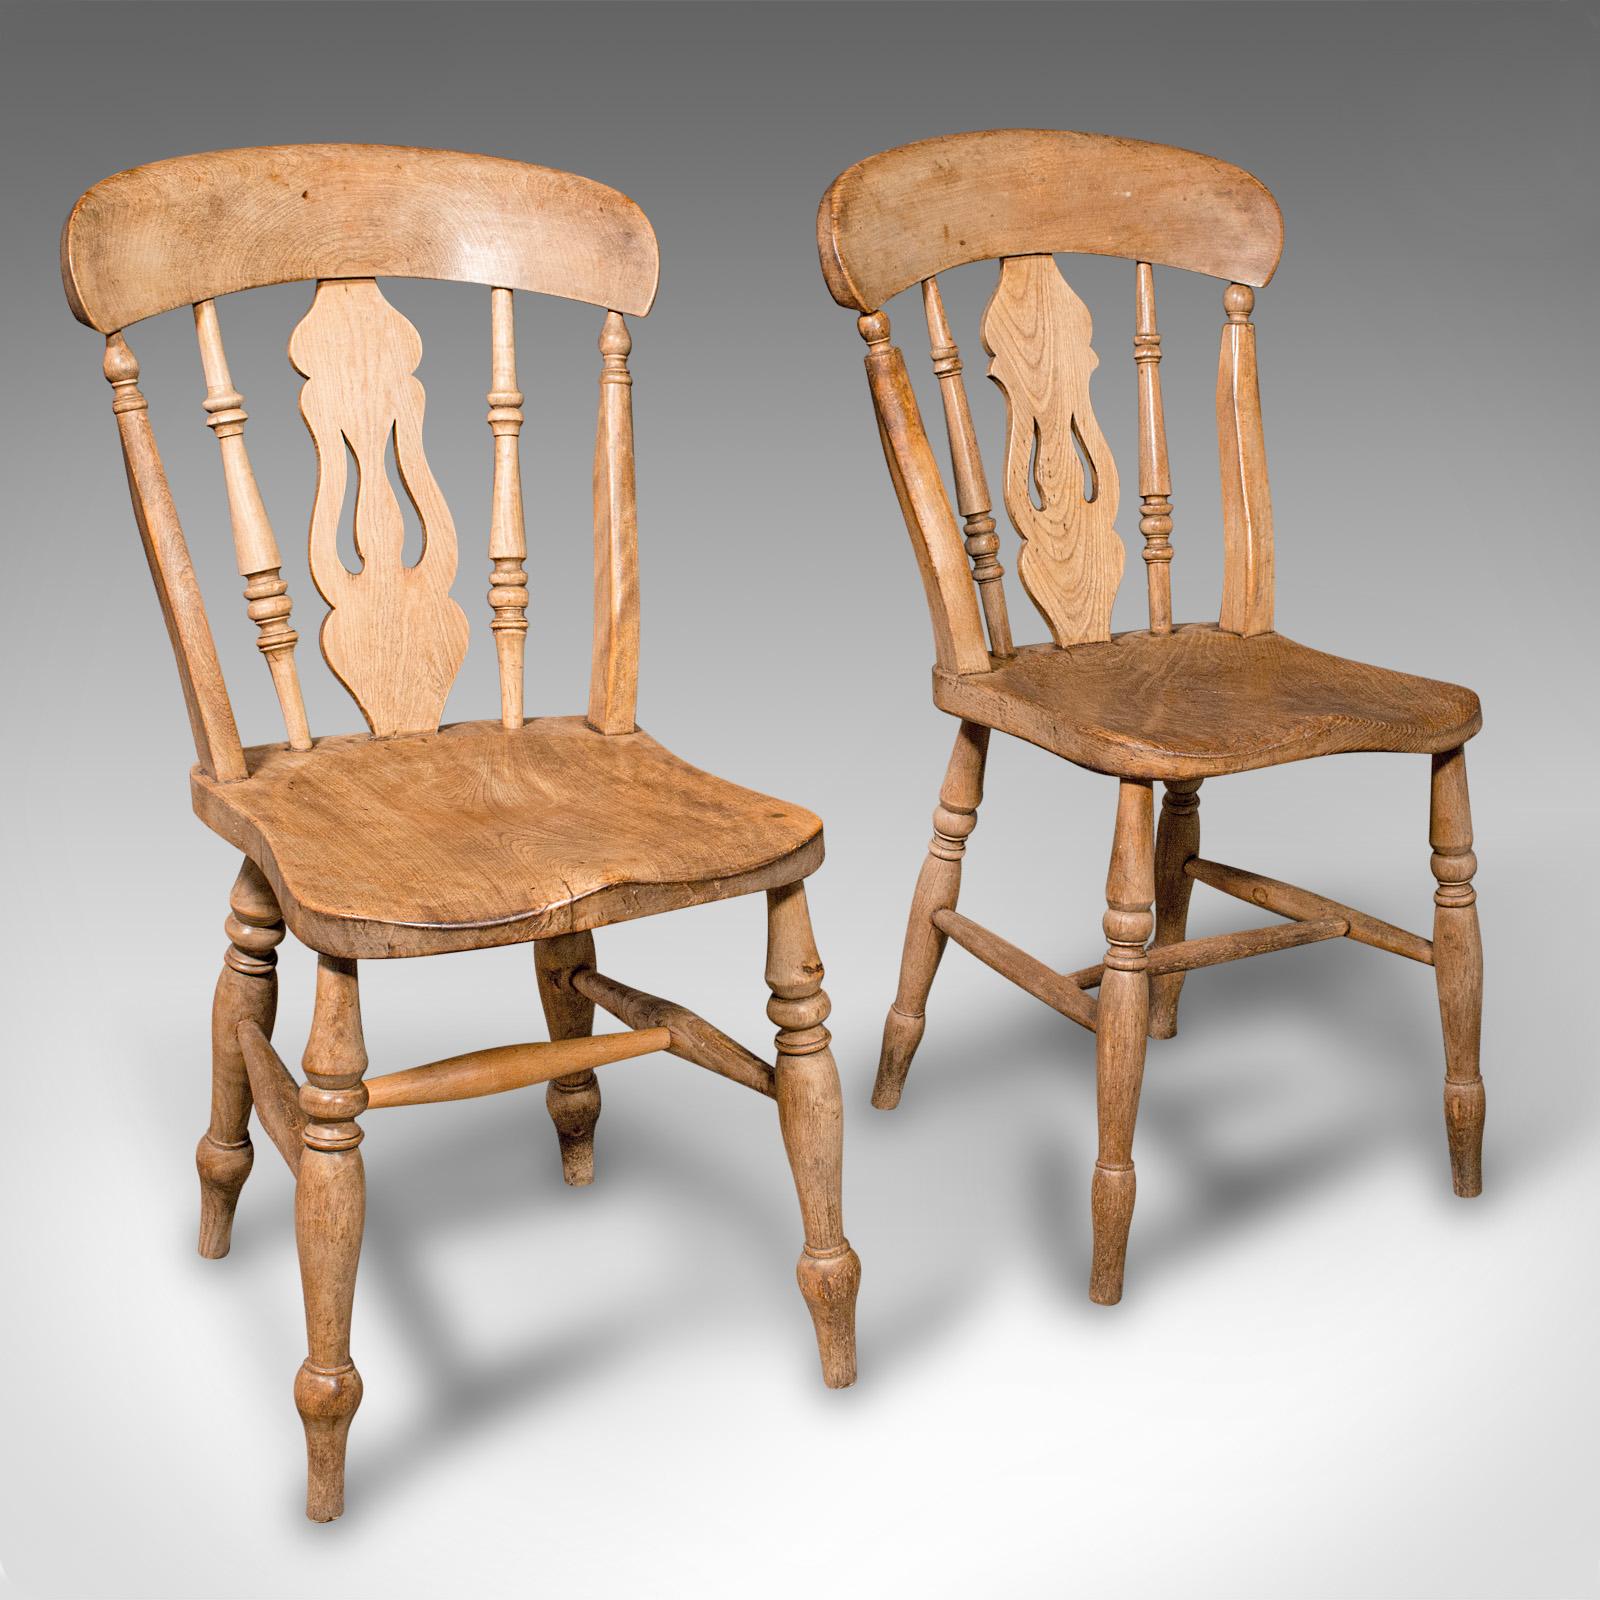 20th Century Set Of 4 Antique Dining Chairs, English Elm, Beech, Kitchen, Reception Hall Seat For Sale